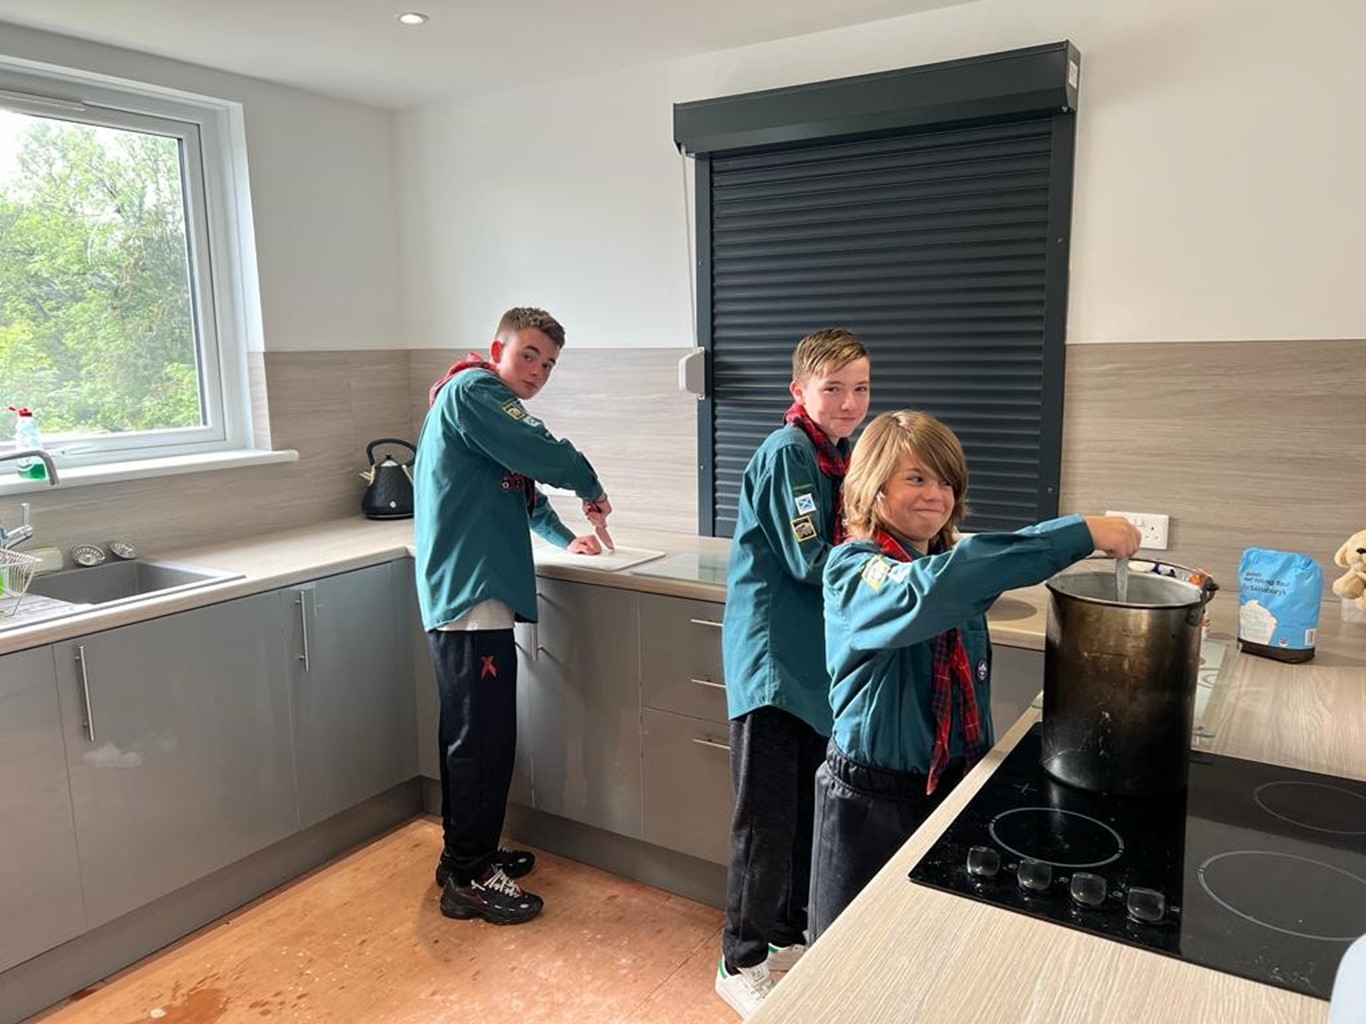 Kitchen transformation for Scout group thanks to airport's FlightPath Fund